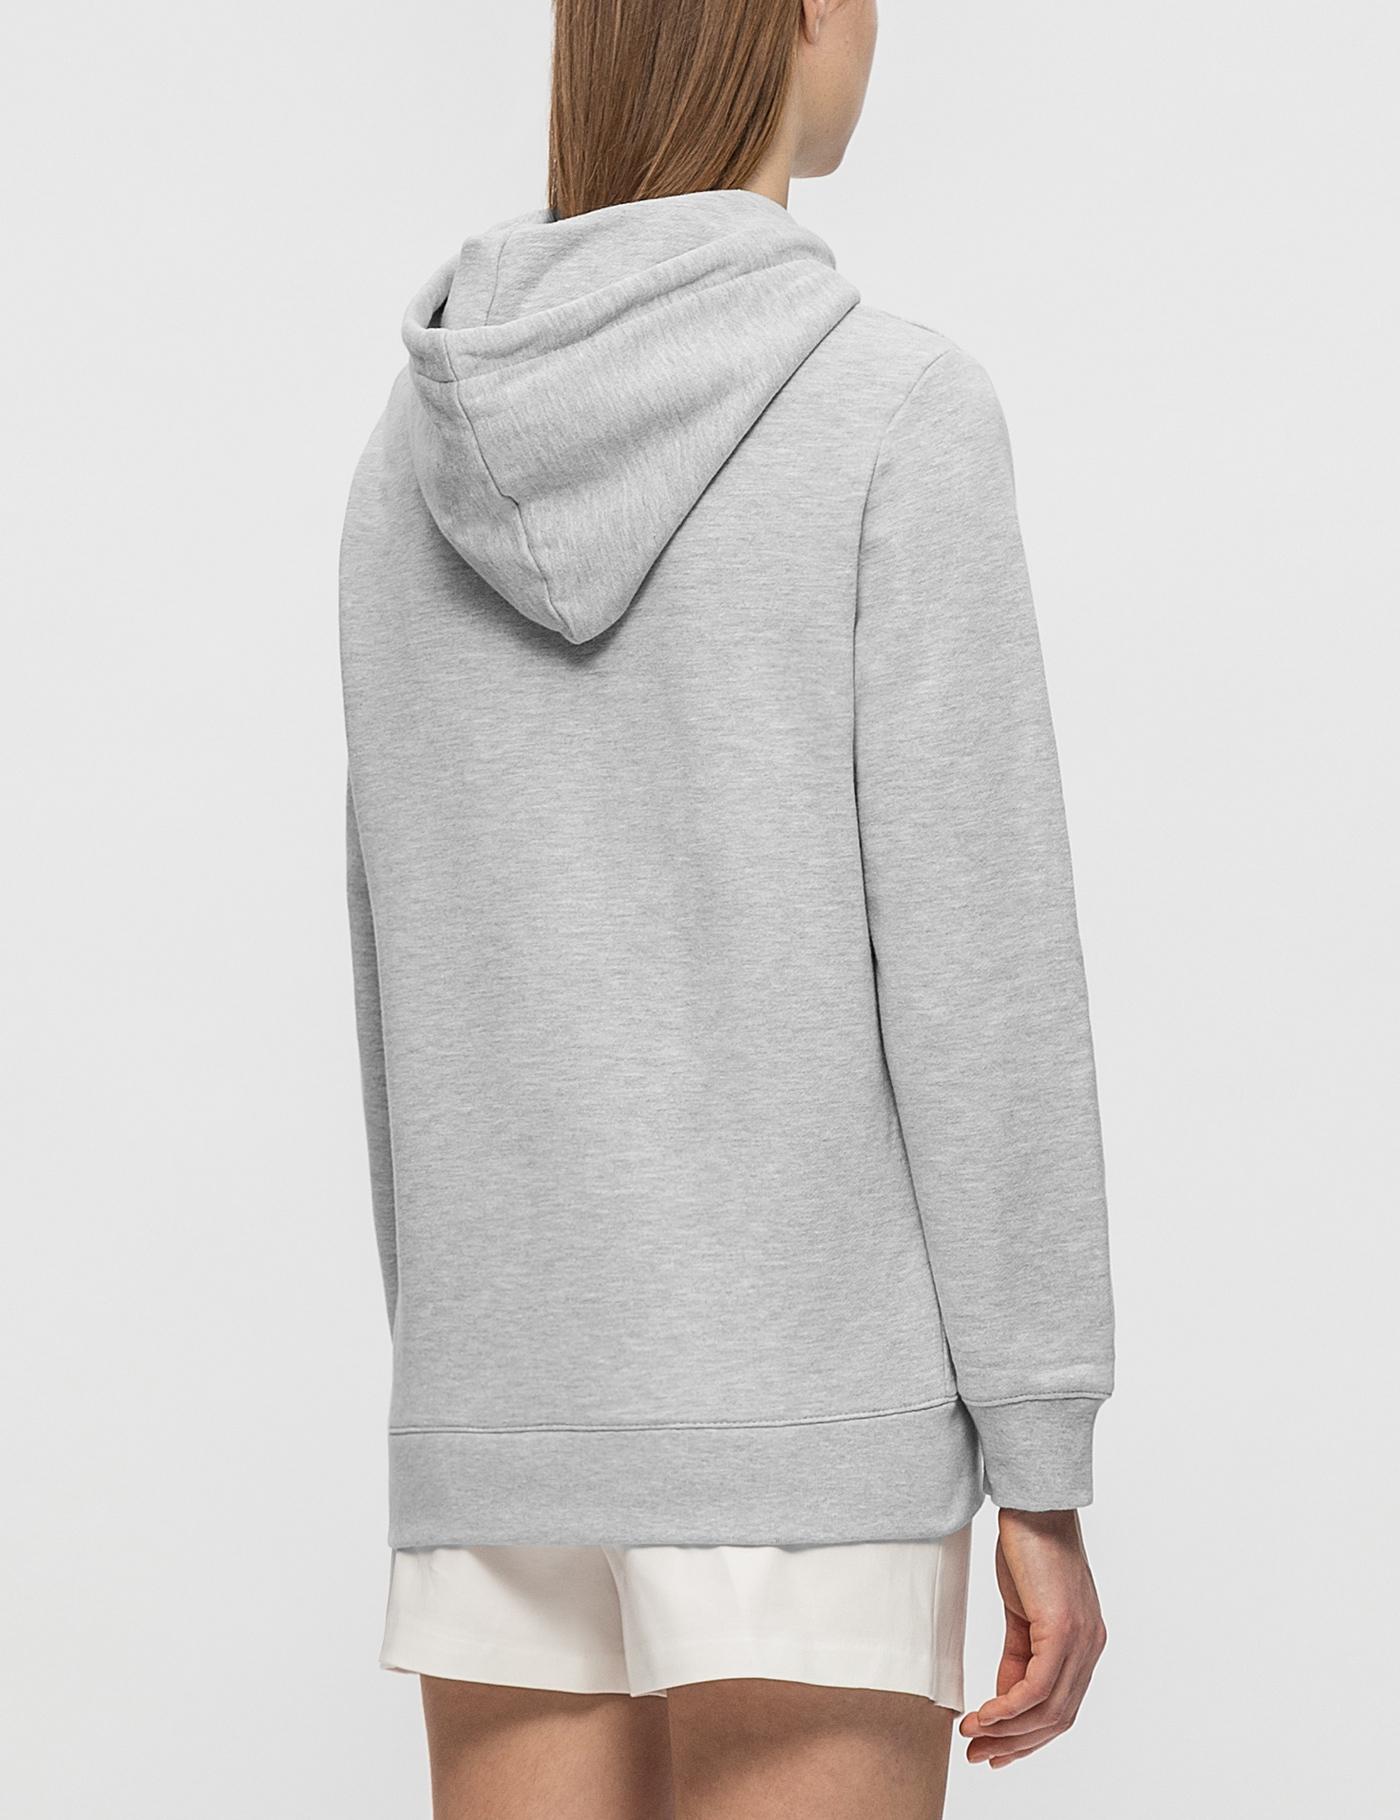 A.P.C. Apc Hoodie in Gray - Lyst